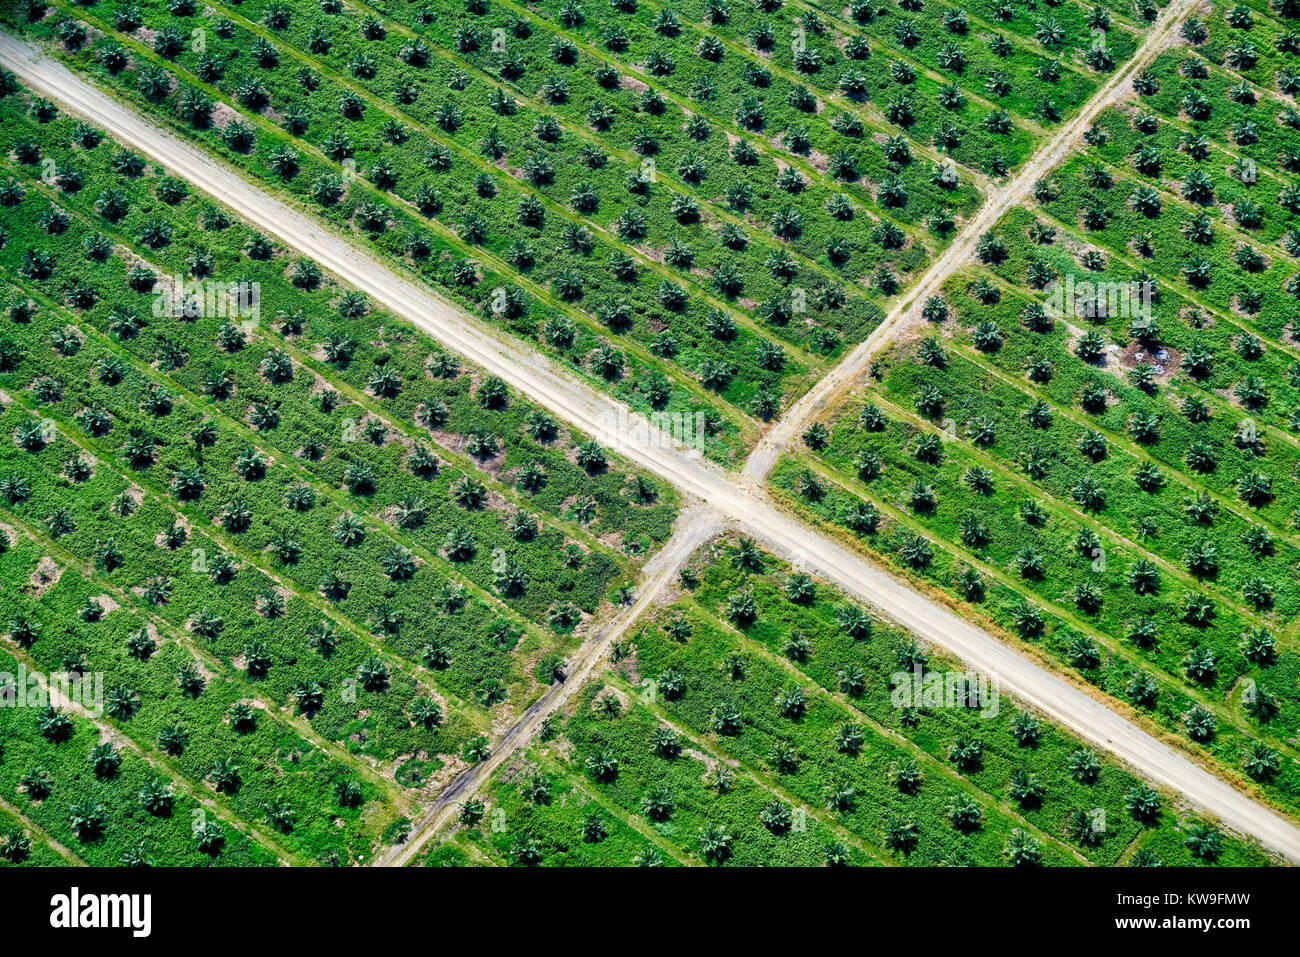 Aerial view of oil palm plantation on Guadalcanal island in the Solomon Islands Stock Photo